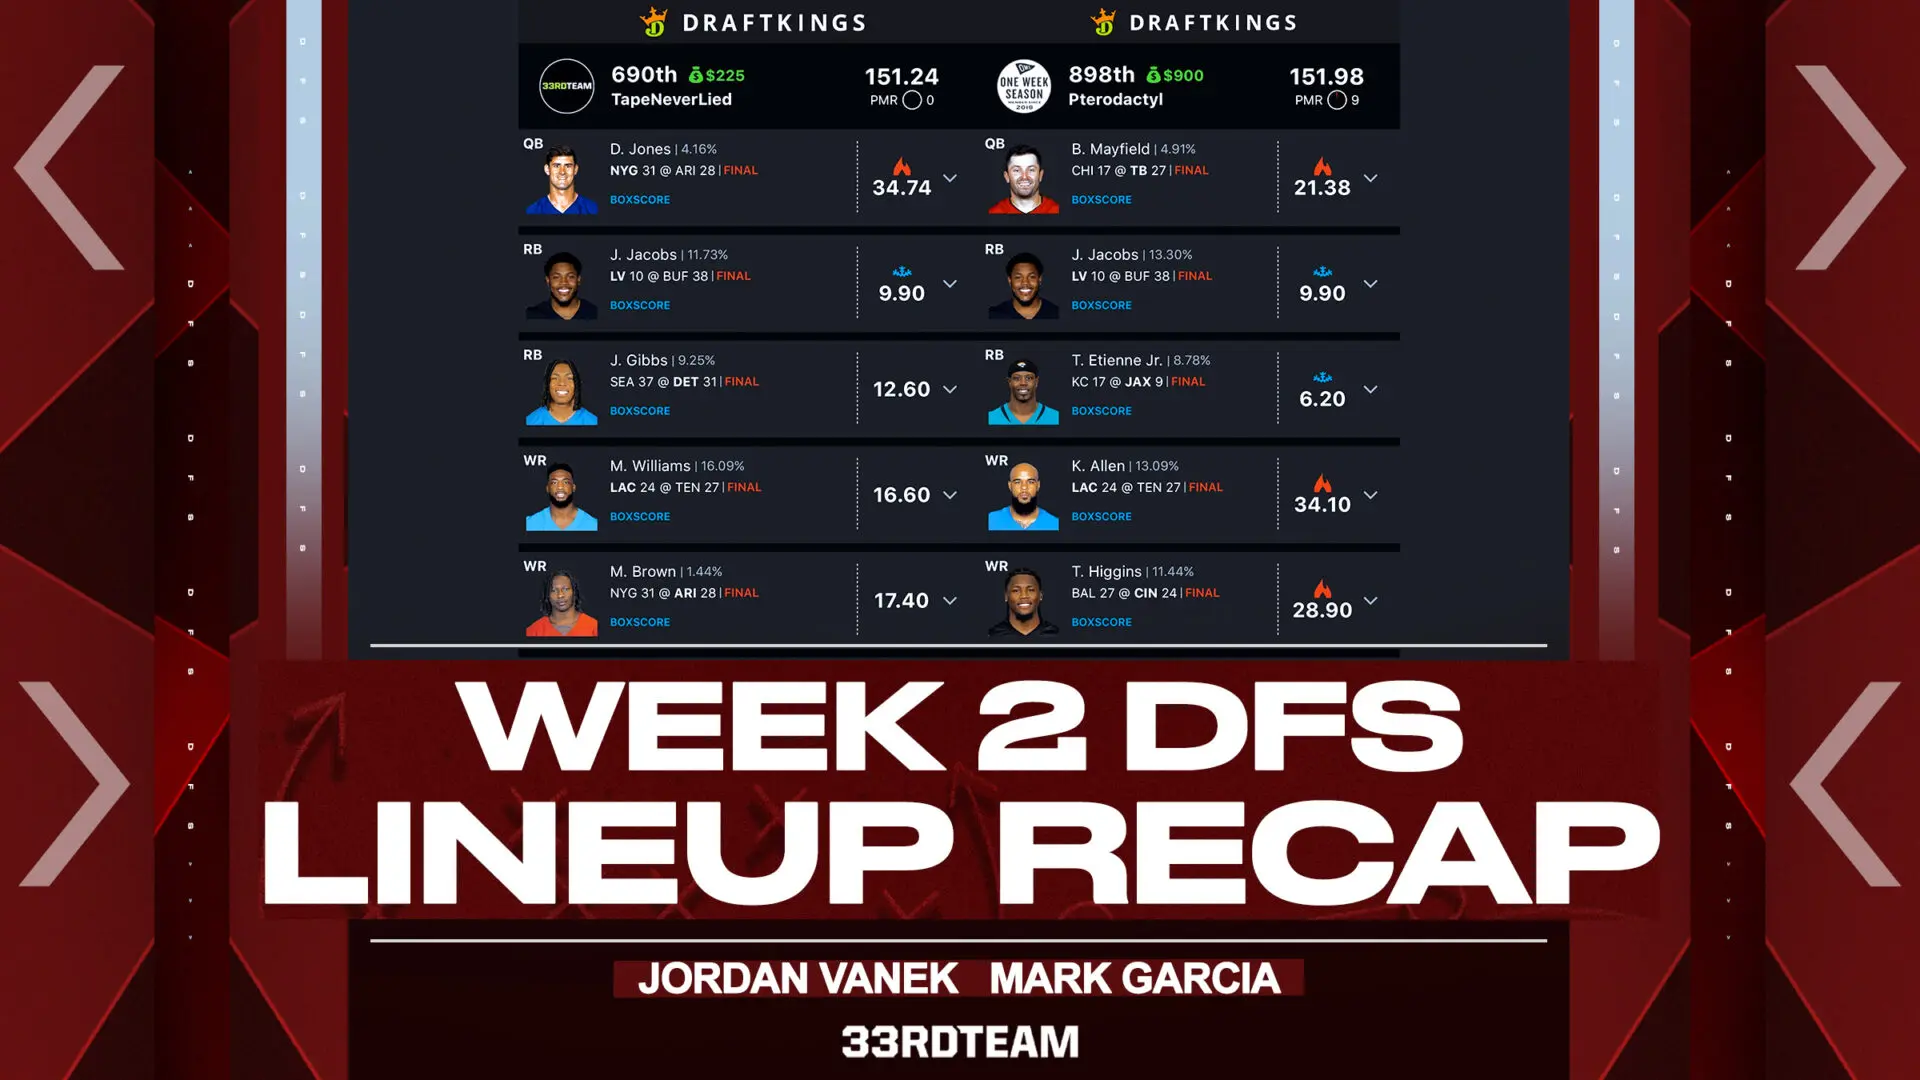 Week 2 NFL DFS Top Model Picks and Value Plays on DraftKings and